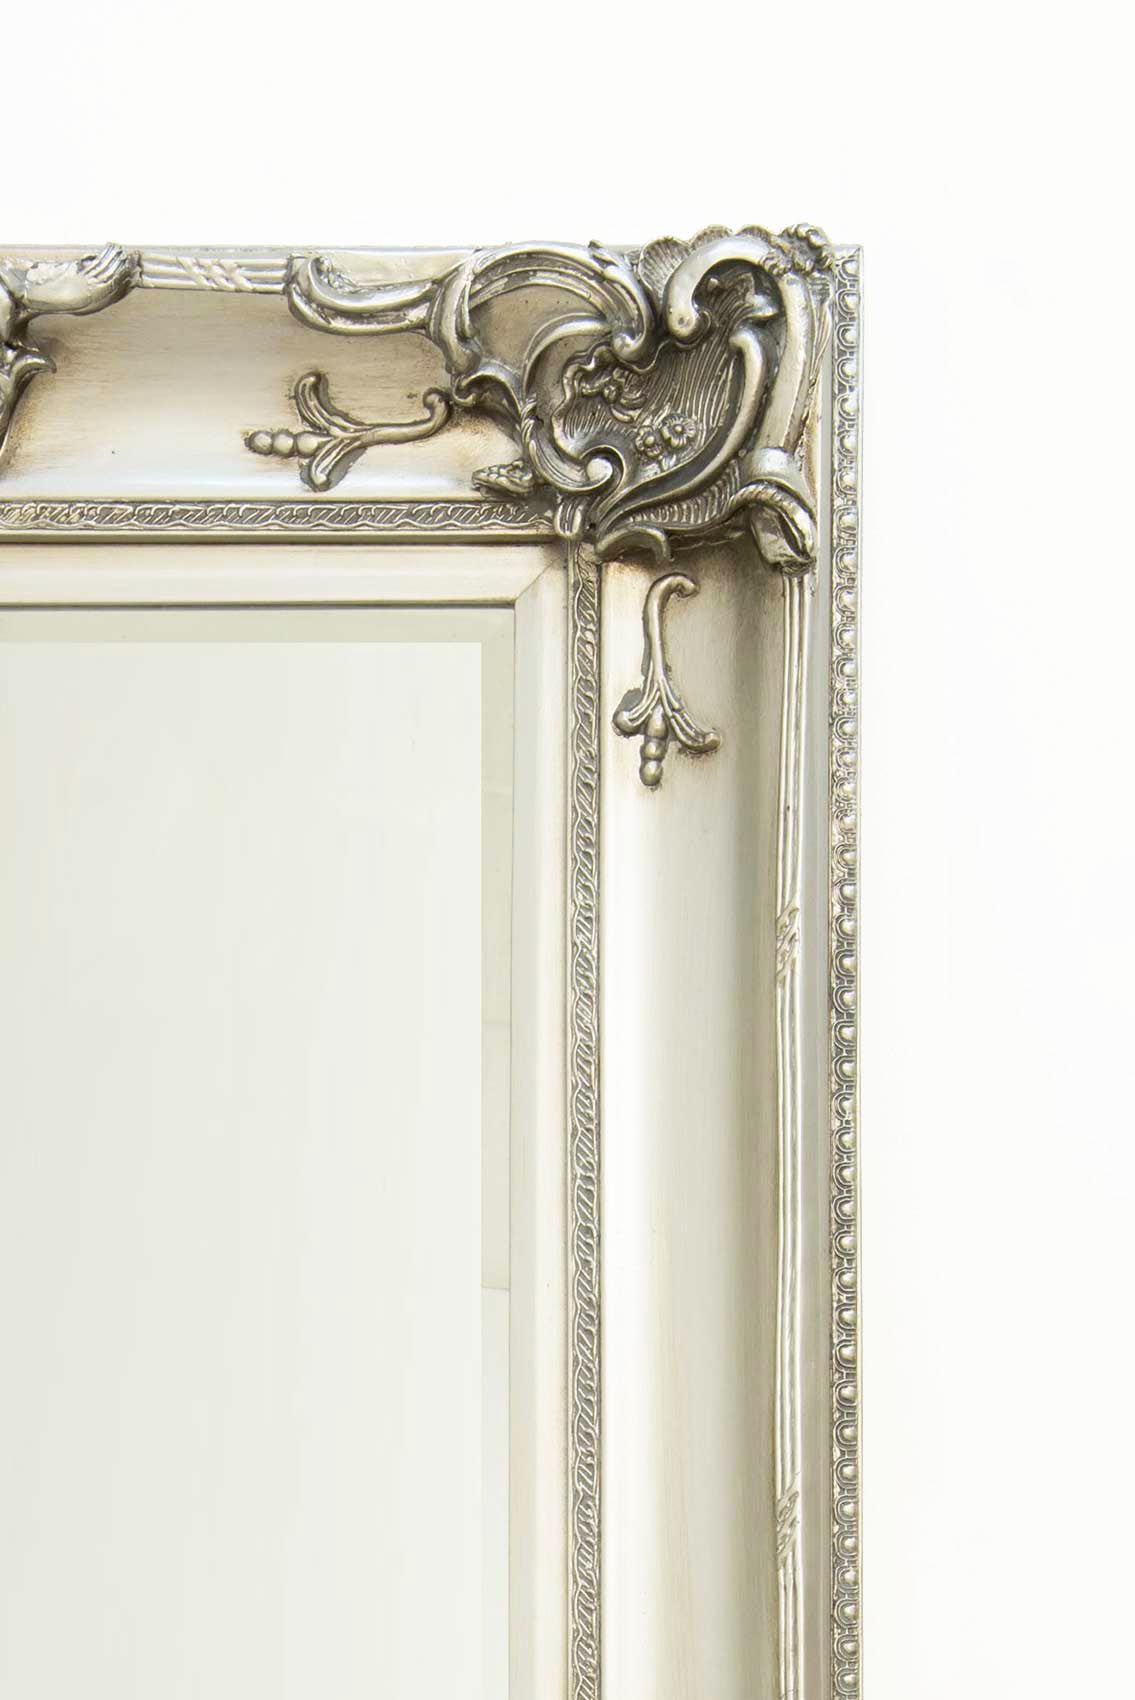 Beautiful Large Silver Decorative Ornate Wall Mirror 6ft X 3ft 183 X Pertaining To Silver Decorative Wall Mirrors (View 13 of 15)